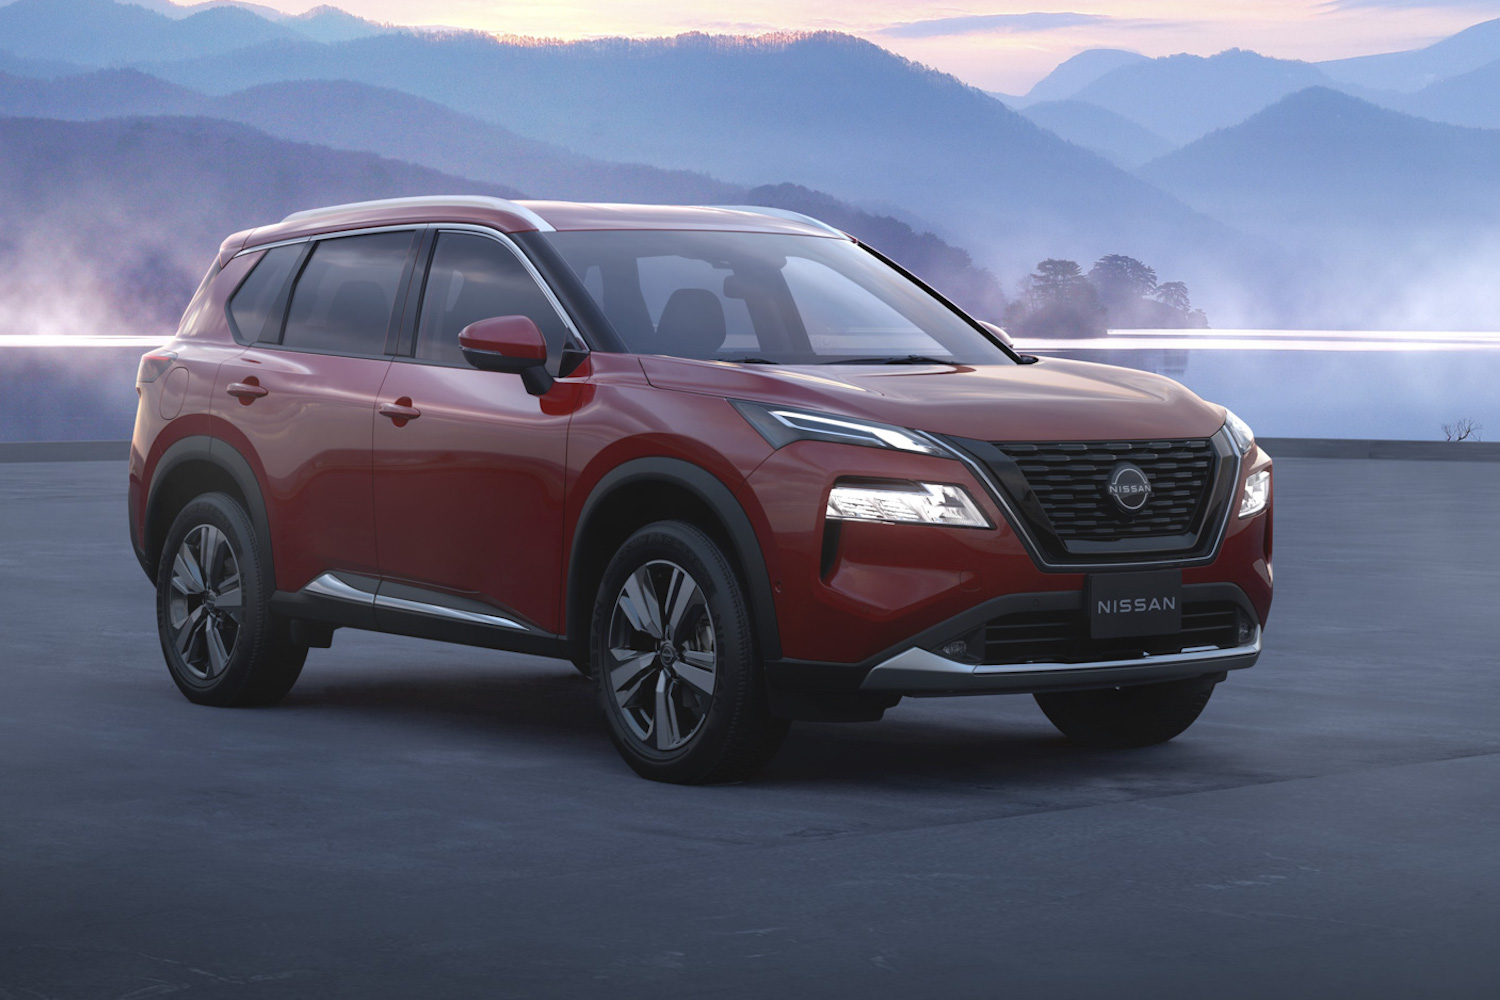 Nissan shows off new electrified X-Trail